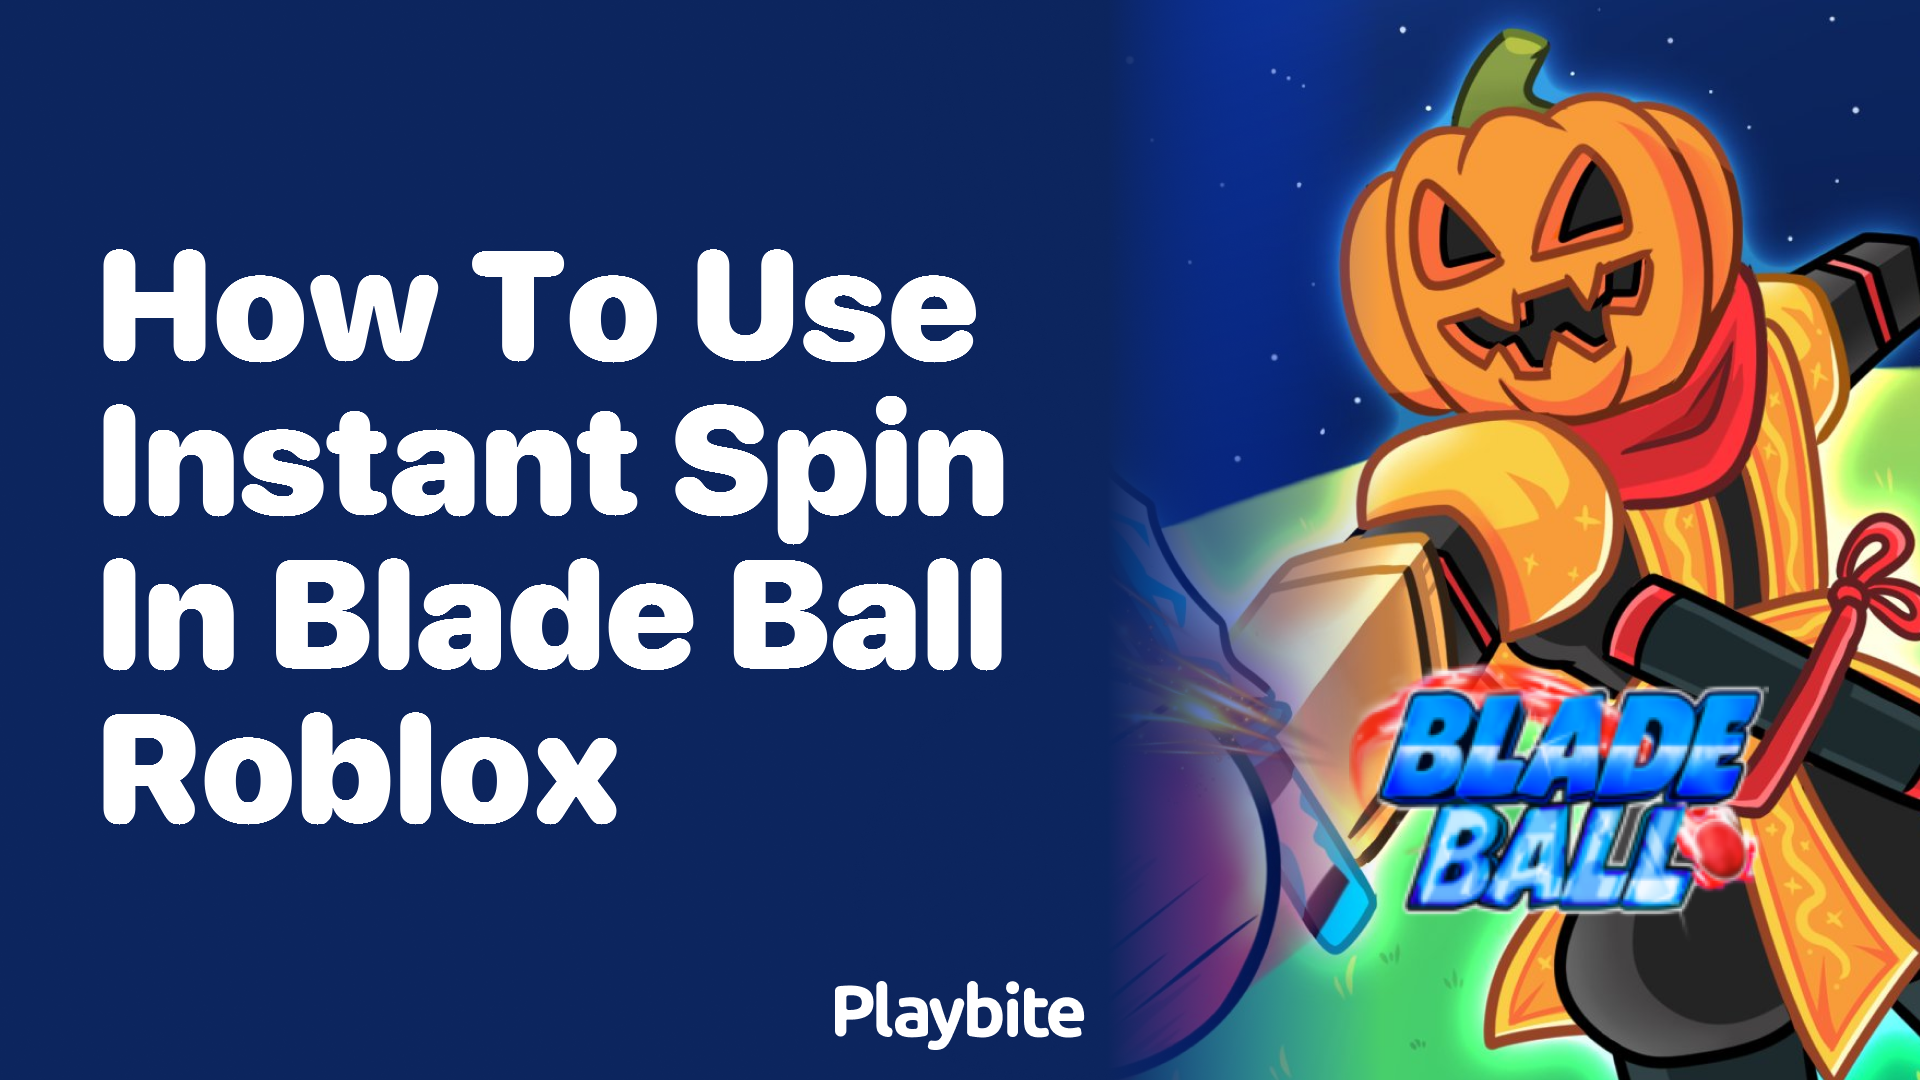 How to Use Instant Spin in Blade Ball Roblox